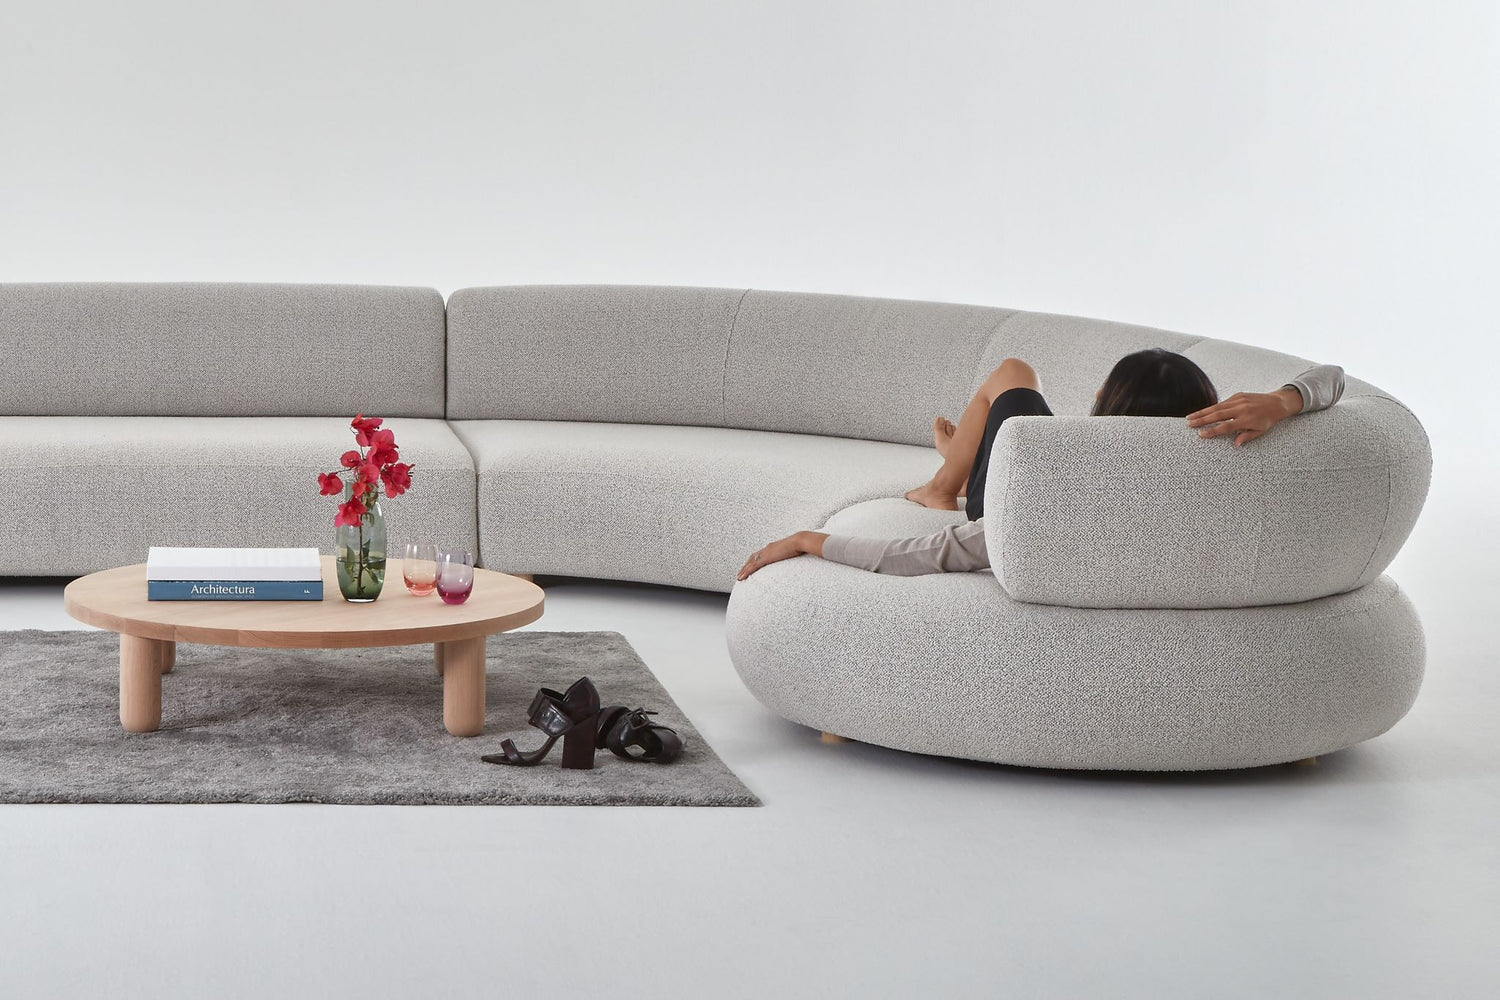 The curved end of the Eclipse designer modular sofa, shown with a woman lying on the curved end.